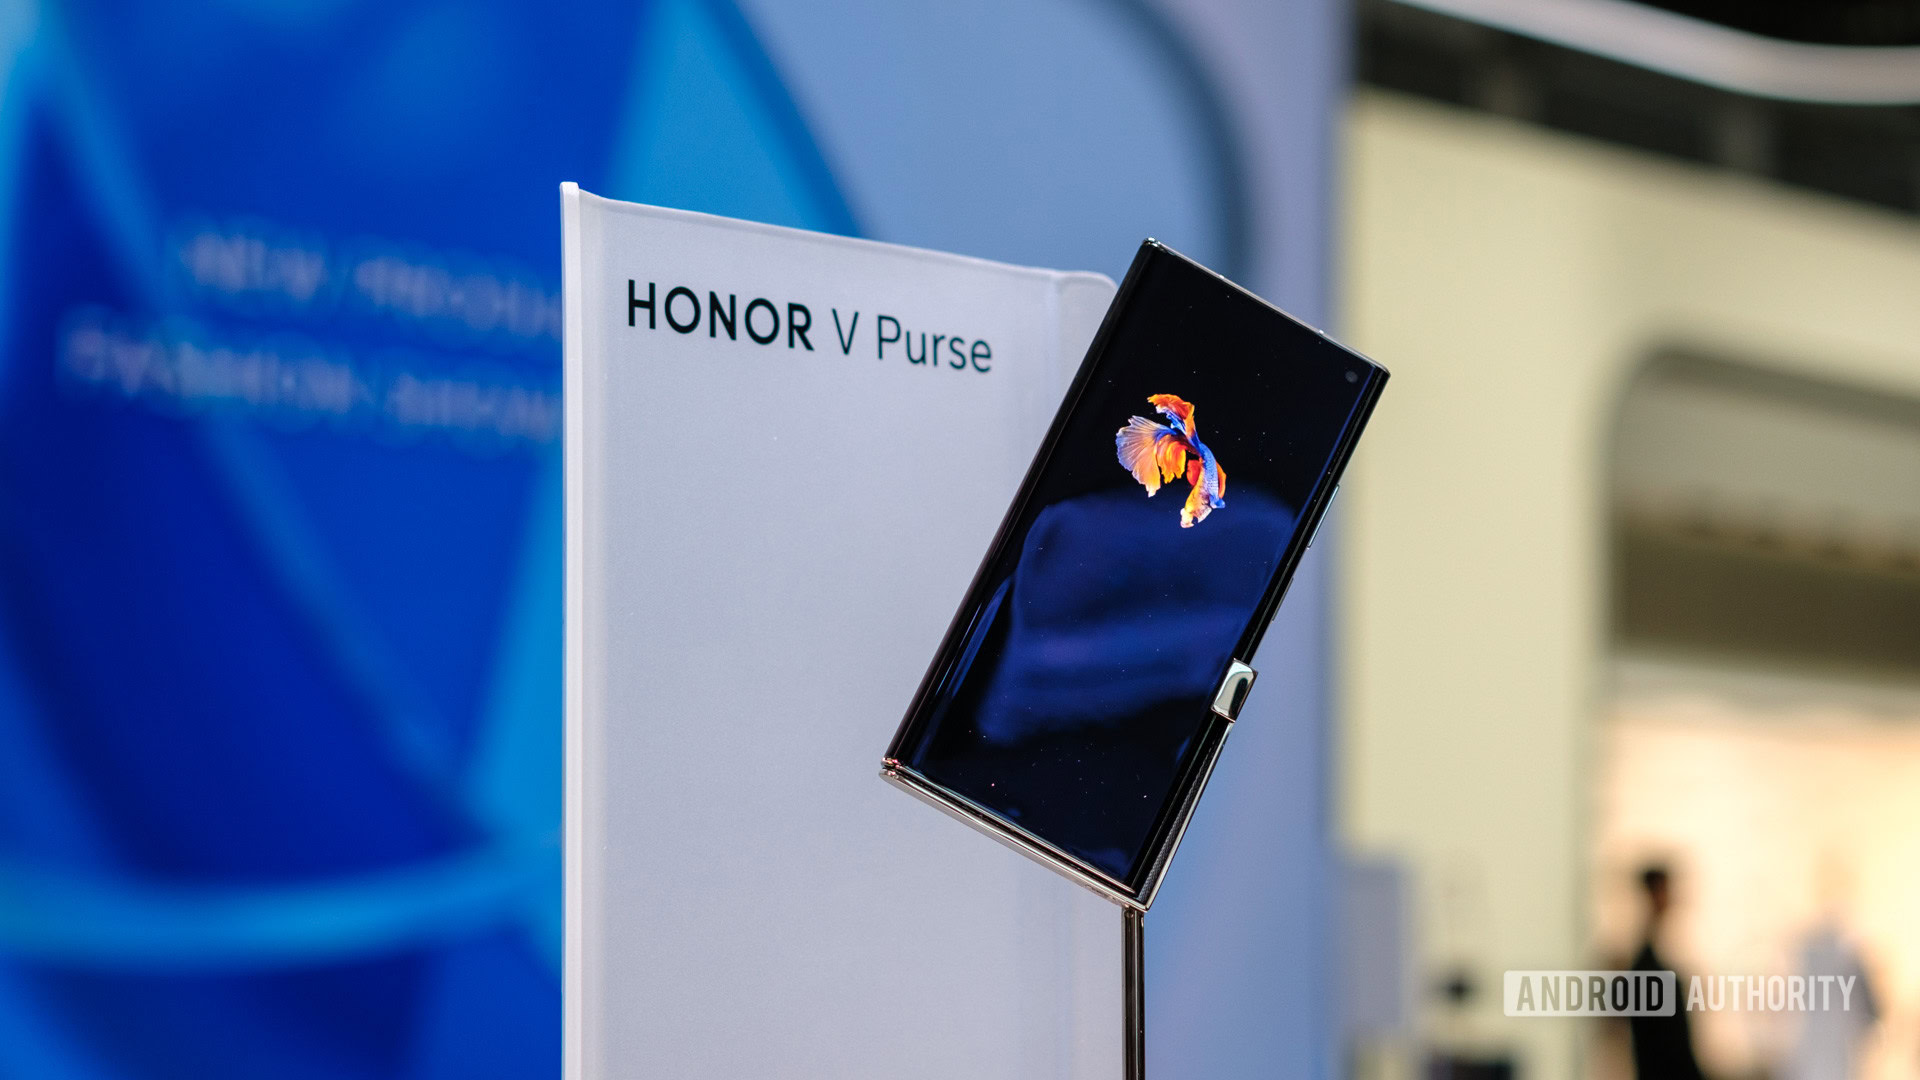 Honor's V Purse Concept Phone Goes On Sale In China